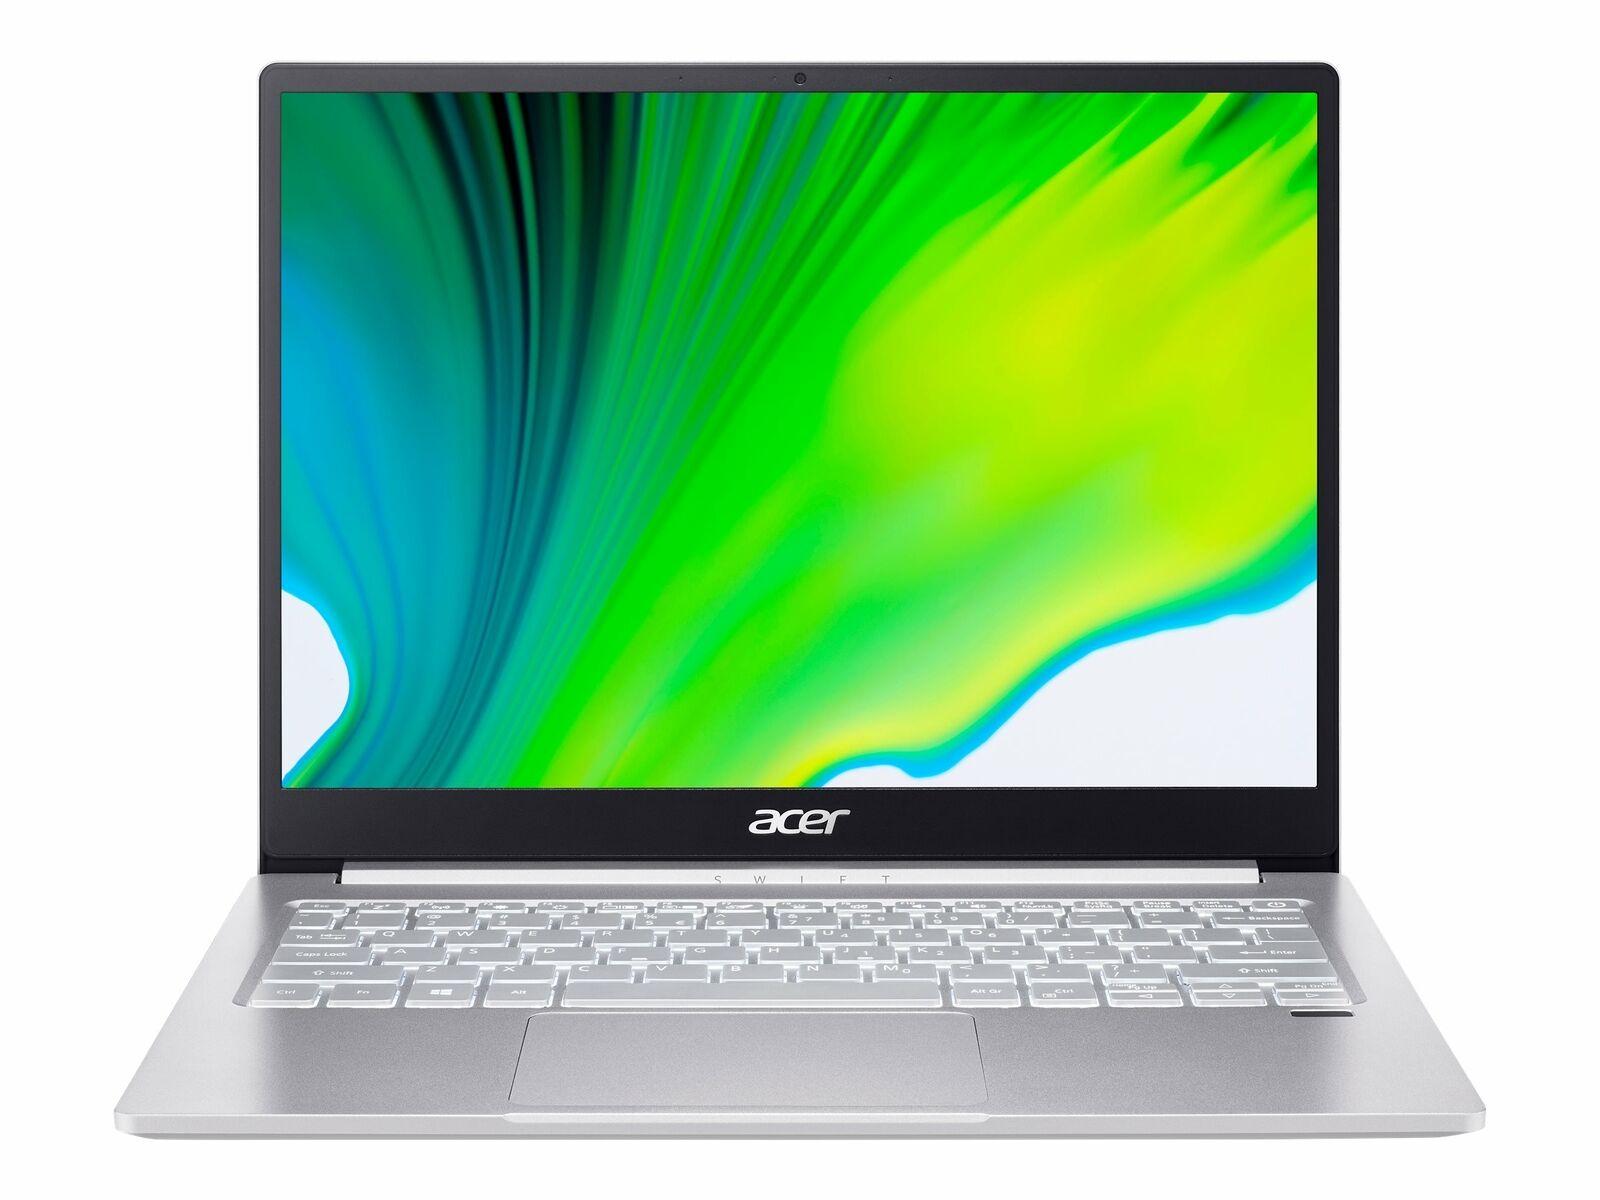 Acer Swift 3 13.5in i7 16GB 512GB Notebook Laptop for $599.99 Shipped